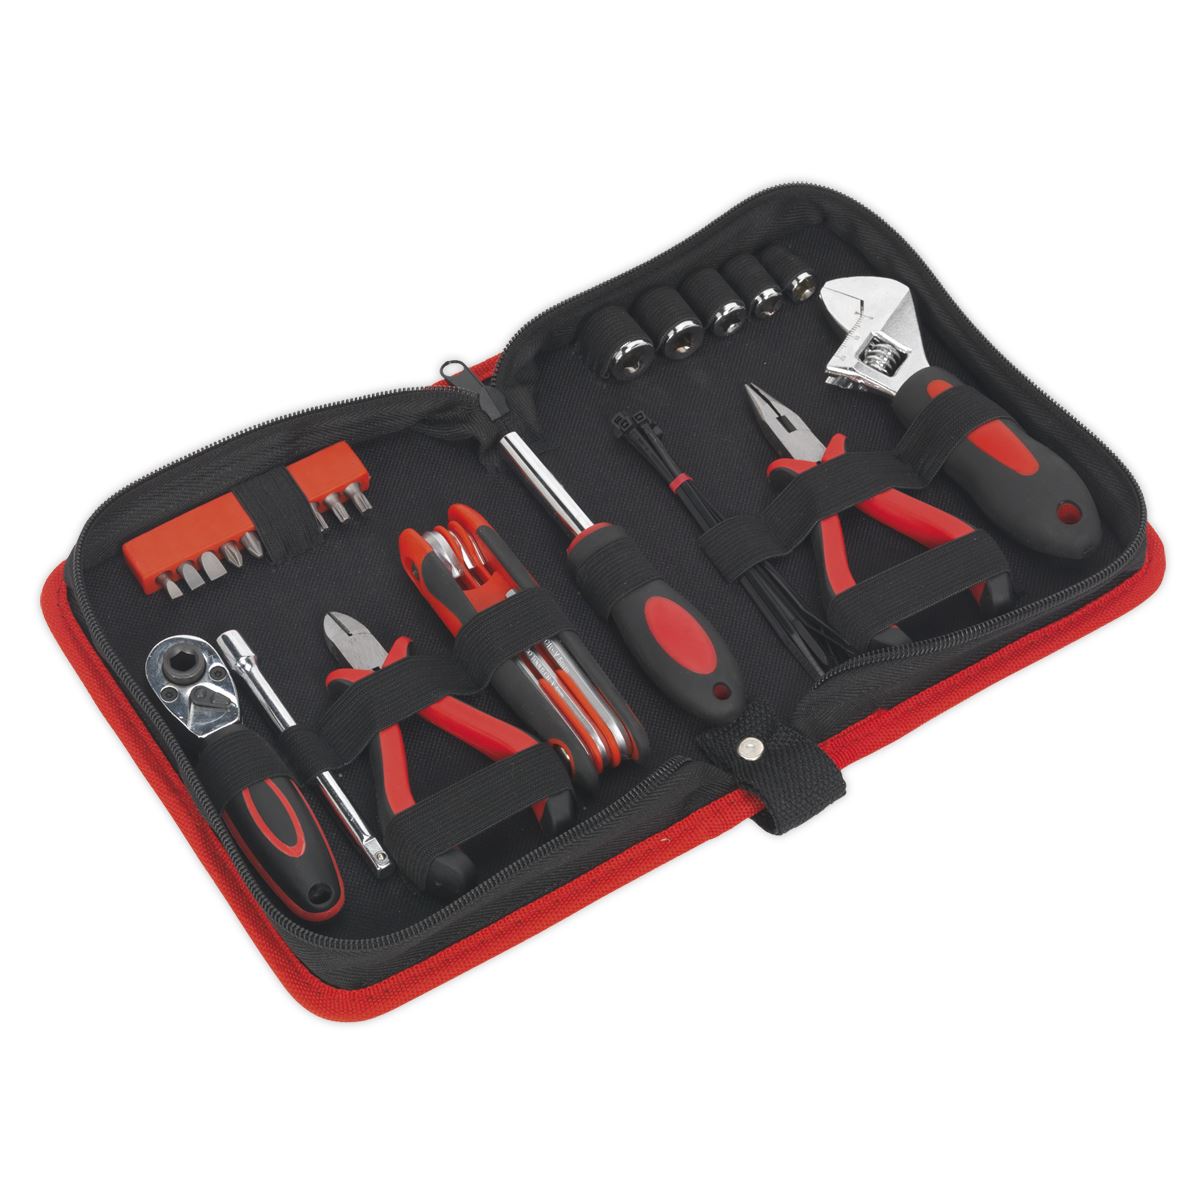 Sealey Compact Tool Kit 28pc